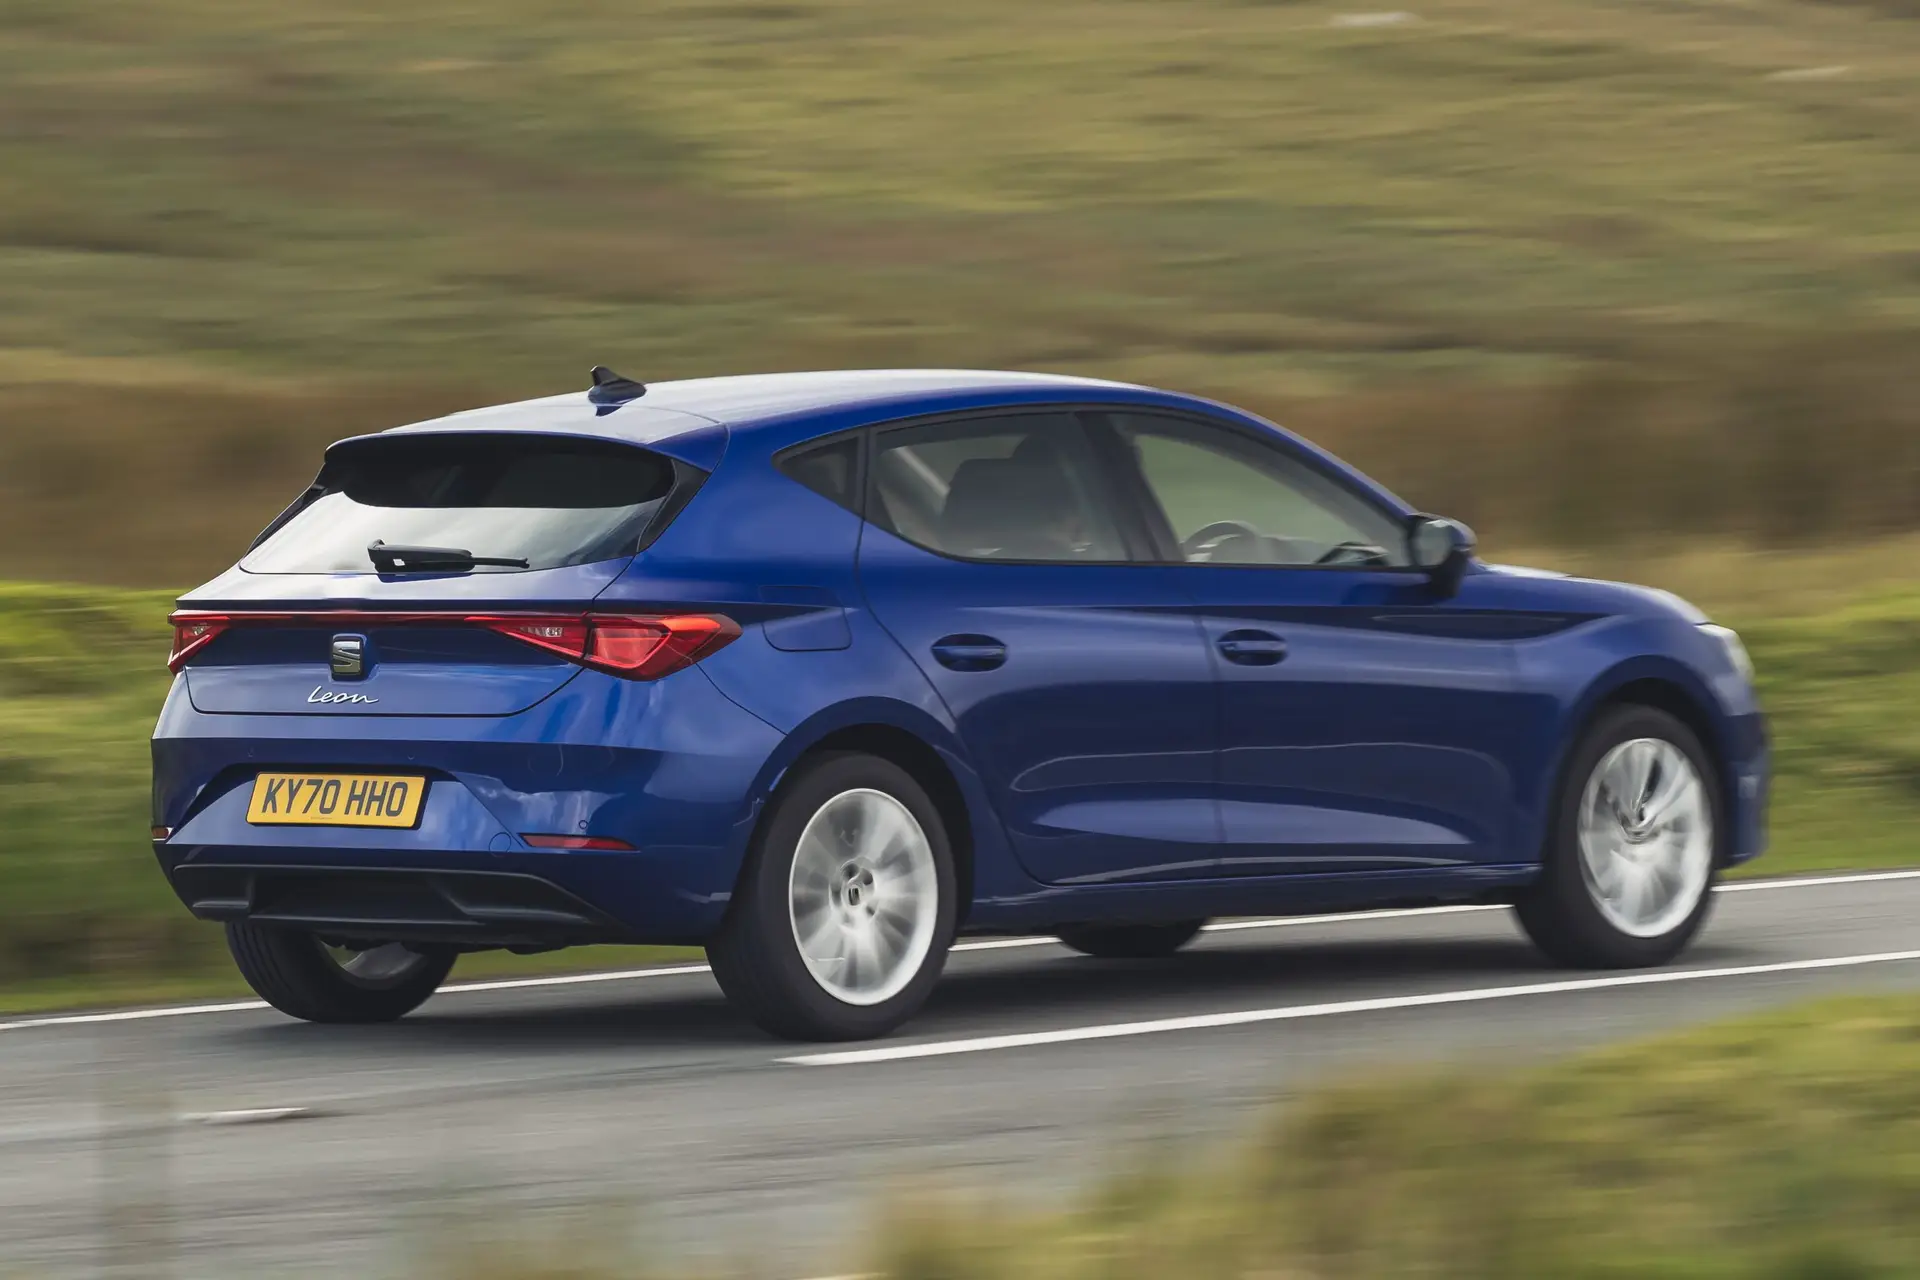 SEAT Leon Review 2023: exterior rear three quarter photo of the SEAT Leon on the road